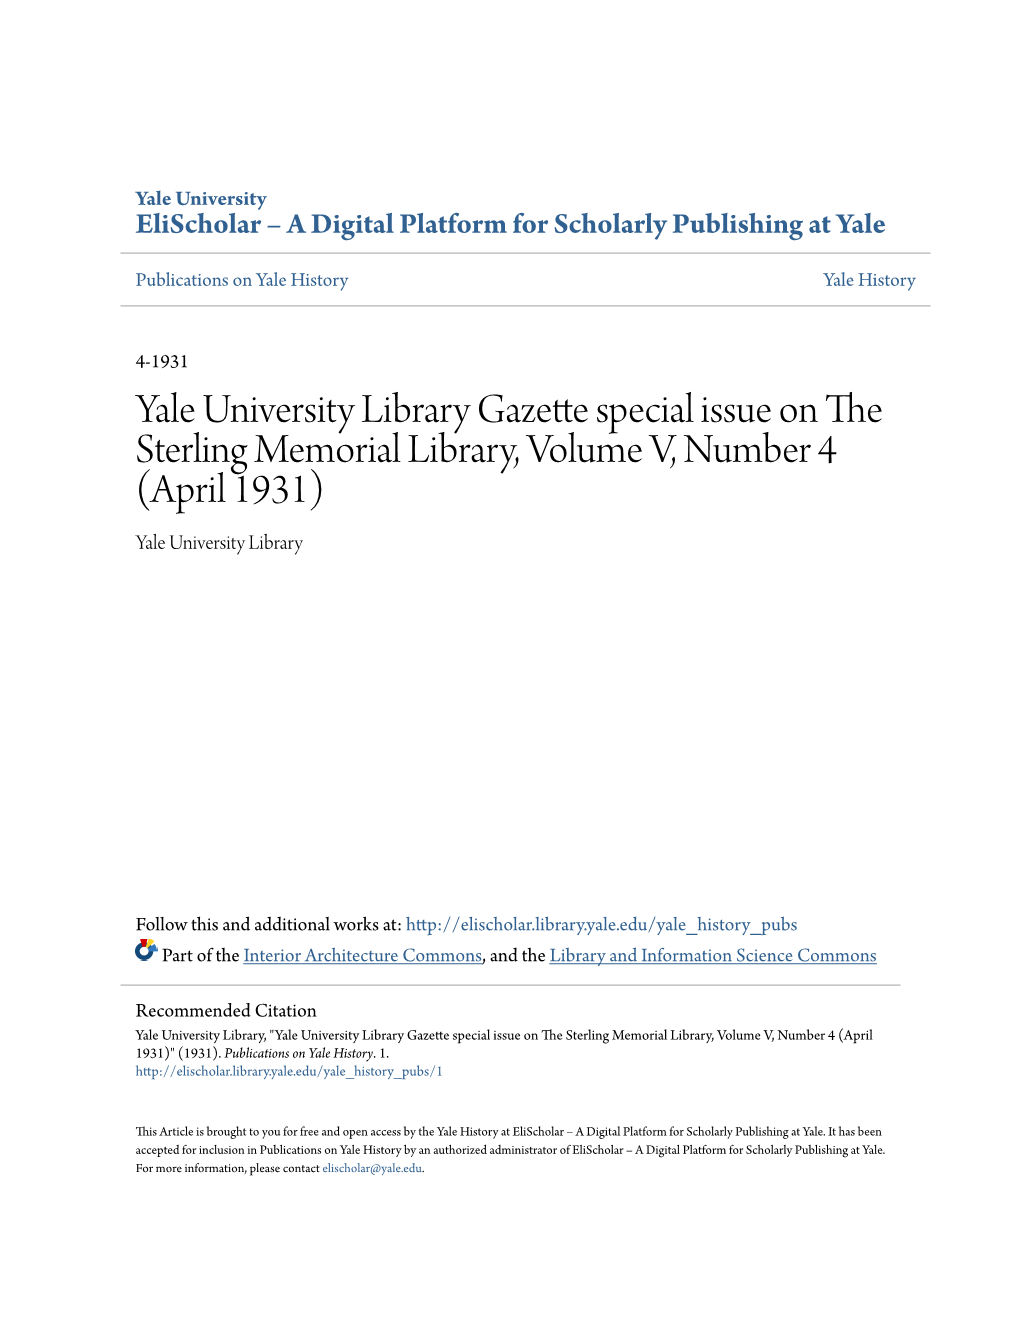 Yale University Library Gazette Special Issue on the Sterling Memorial Library, Volume V, Number 4 (April 1931) Yale University Library